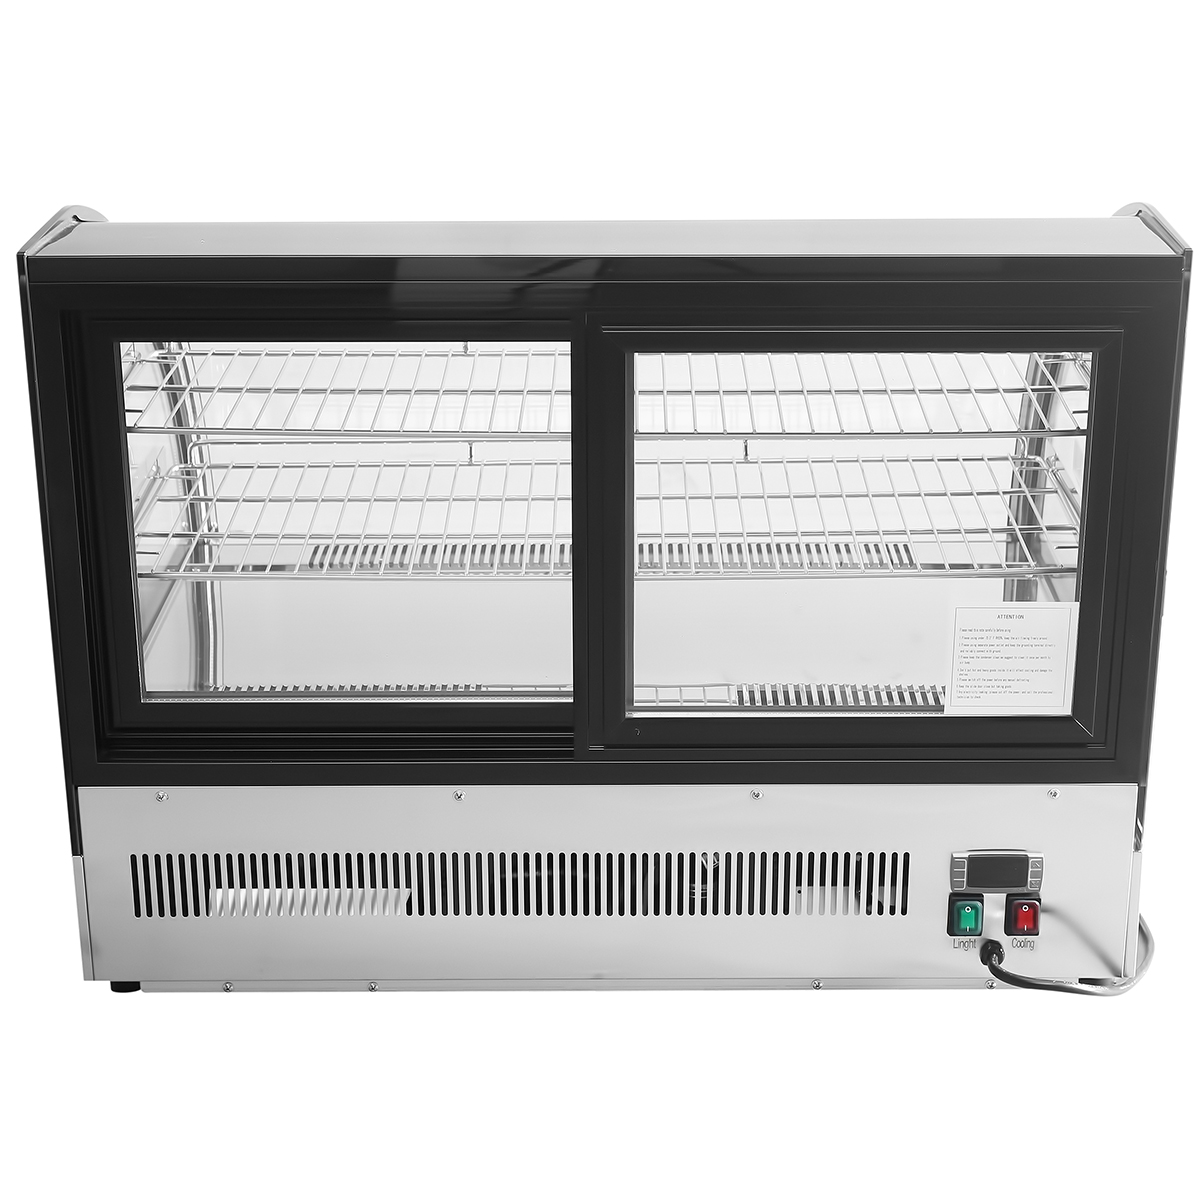 Atosa CRDC-46 Refrigerated Countertop Display Case, 4.6 cu.ft. - 35-2/5"W x 22-1/10"D x 26-2/5"H image 3